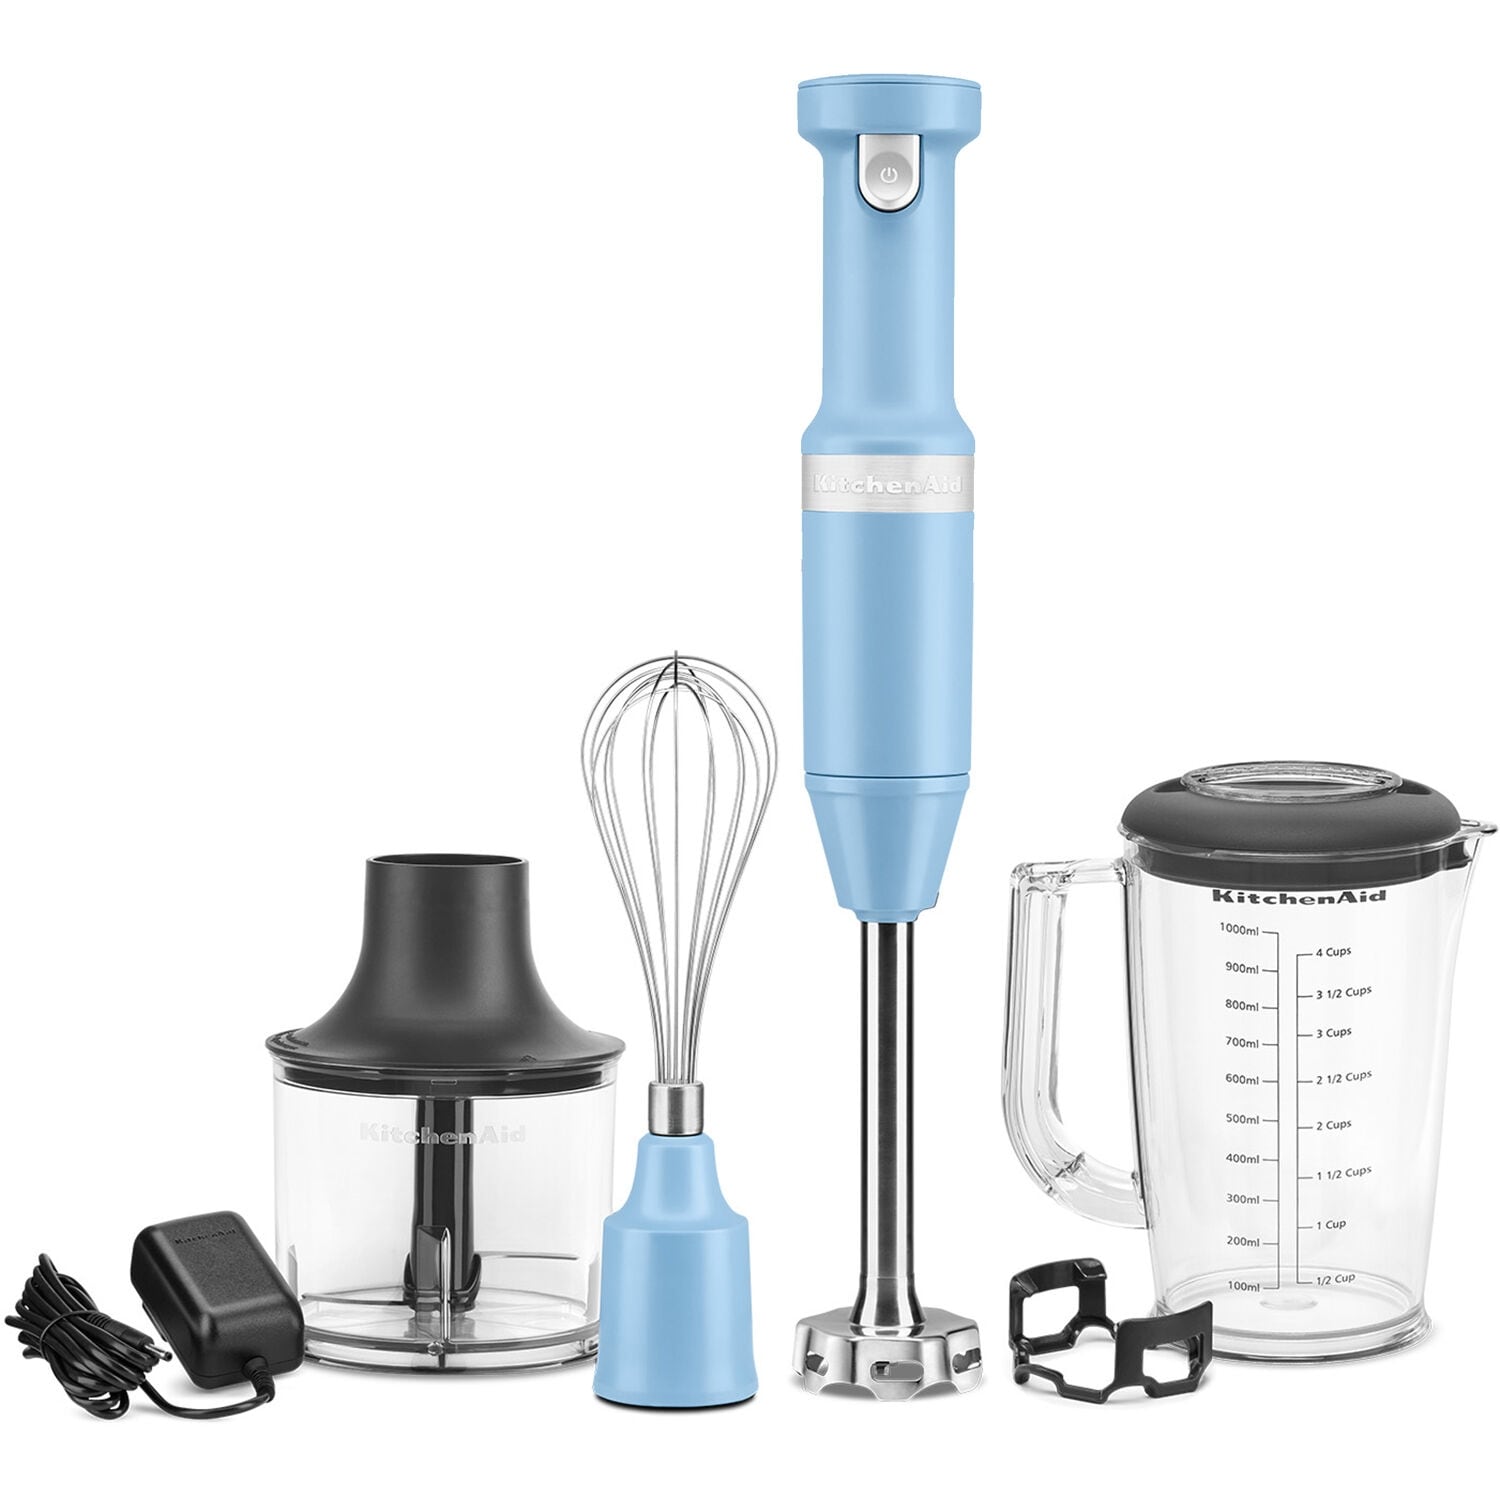 KitchenAid Cordless Variable Speed Hand Blender with Chopper and Whisk Attachment Blue